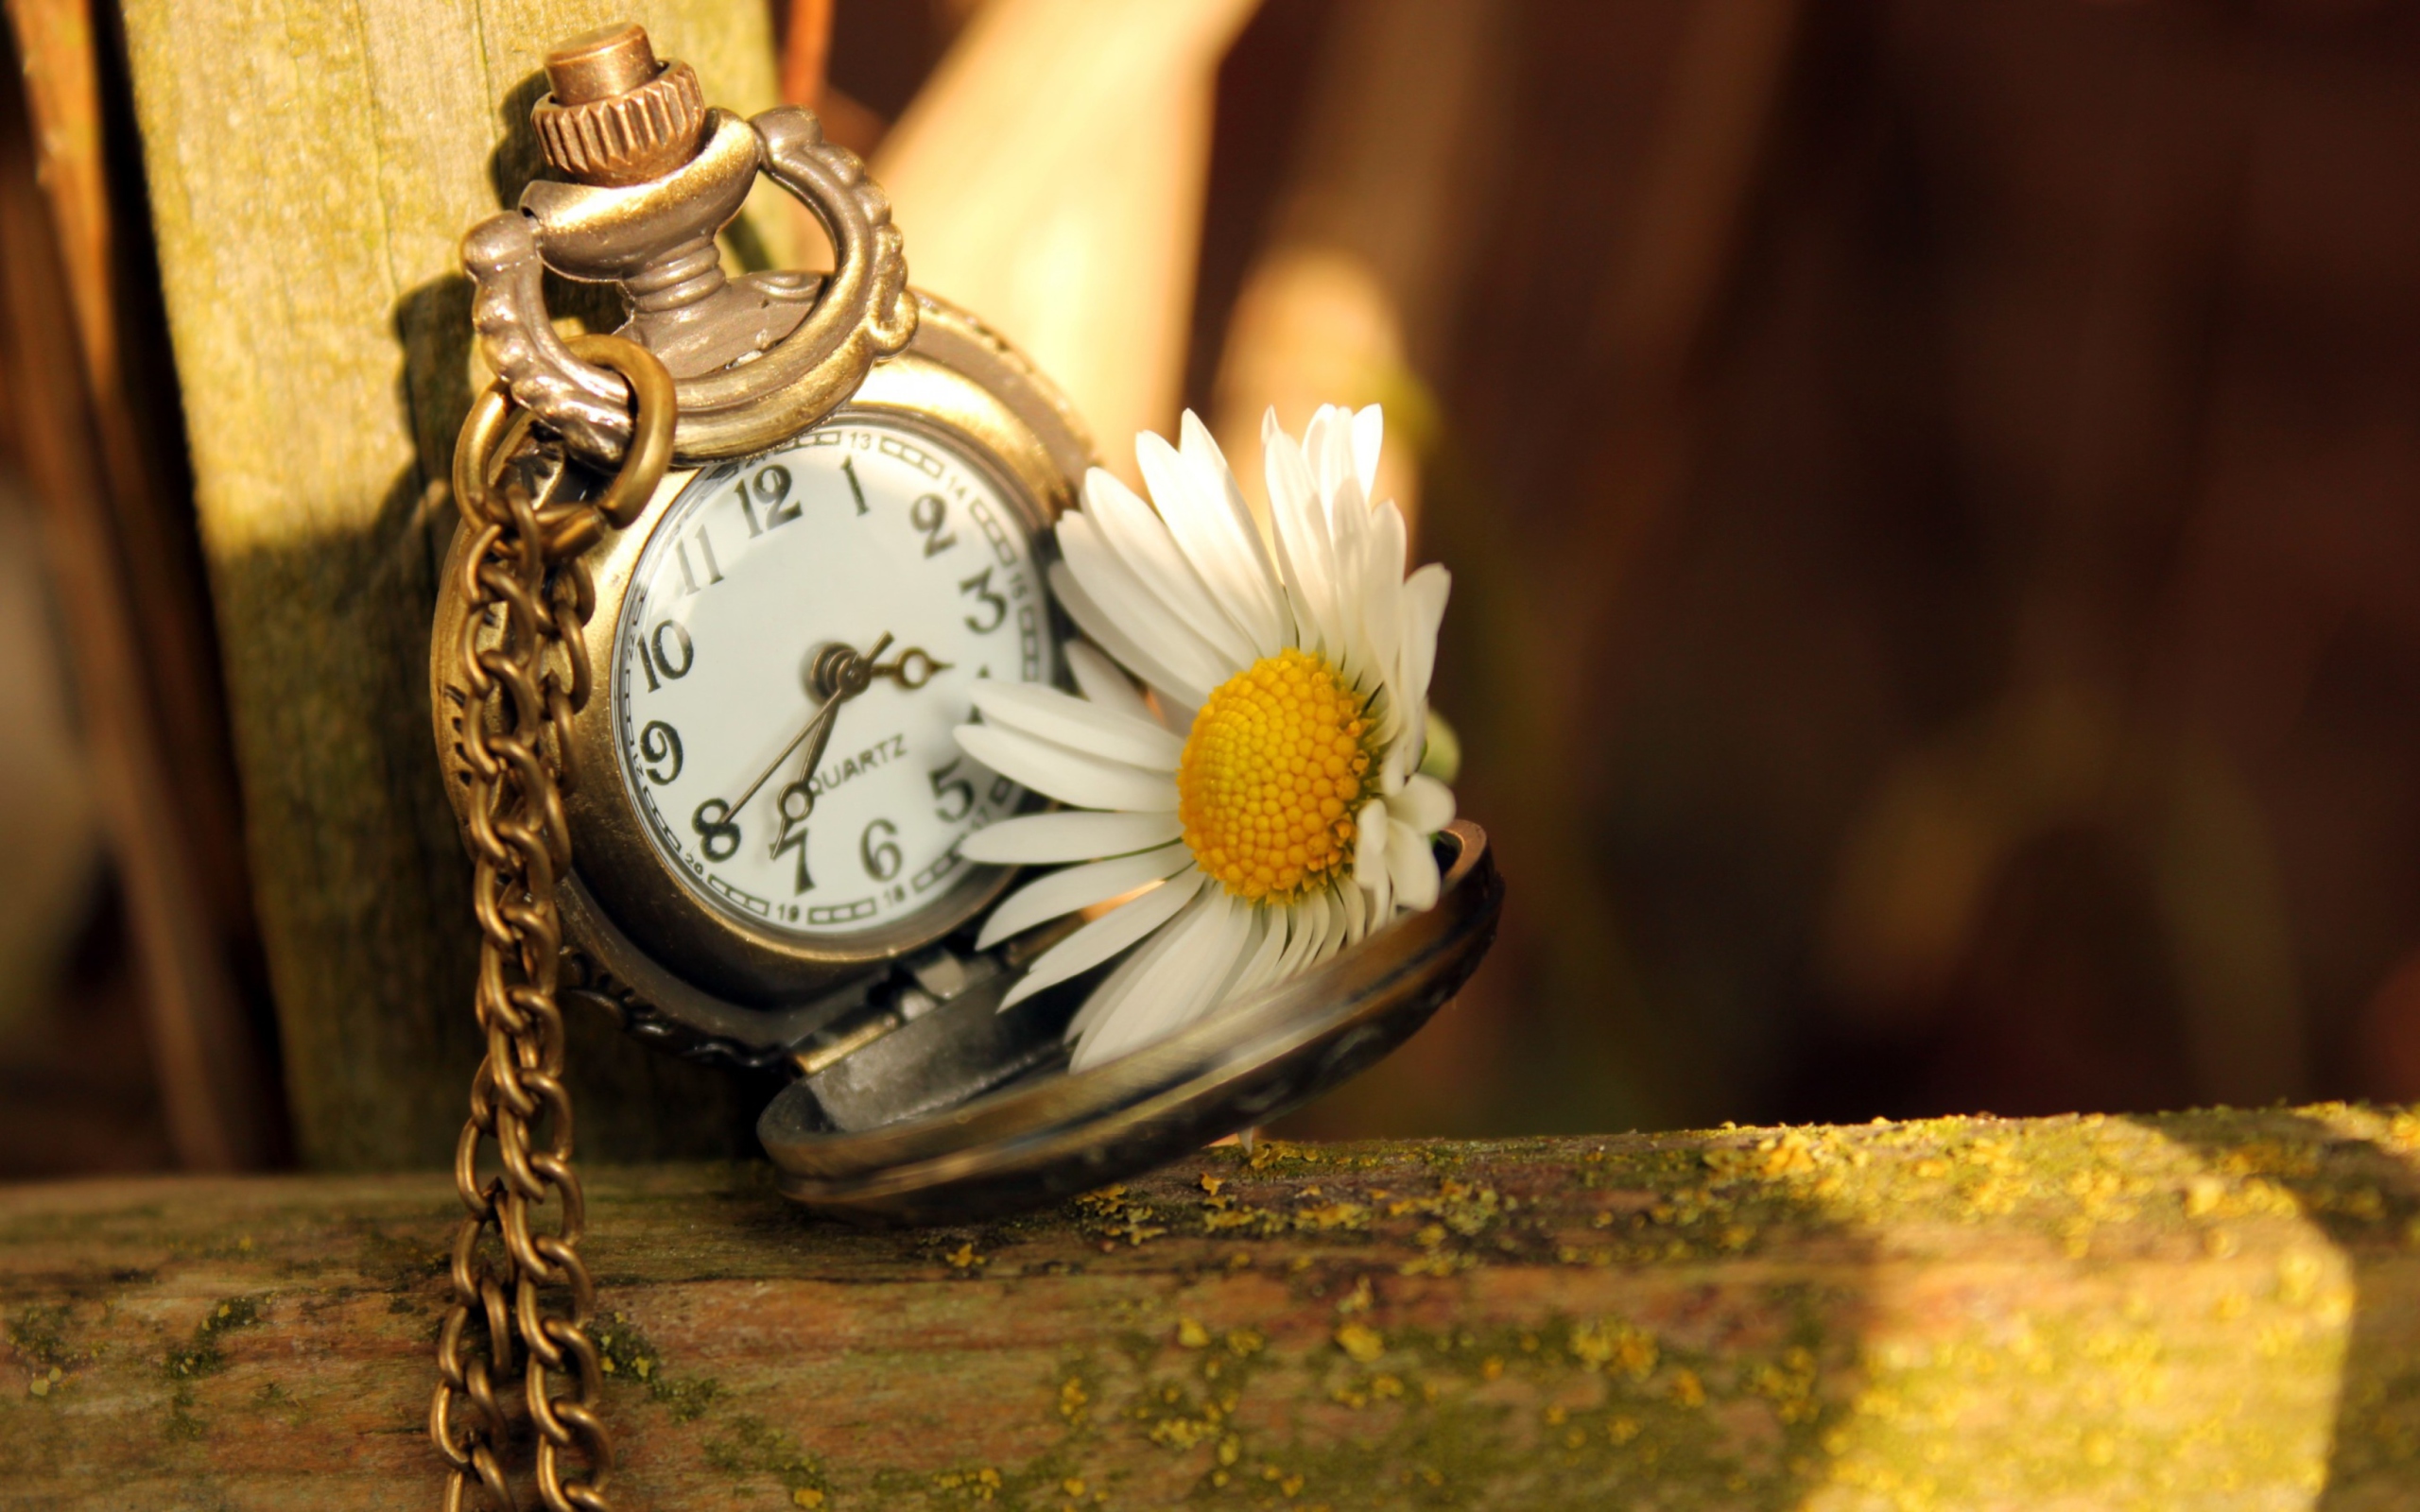 Vintage Watch And Daisy wallpaper 2560x1600